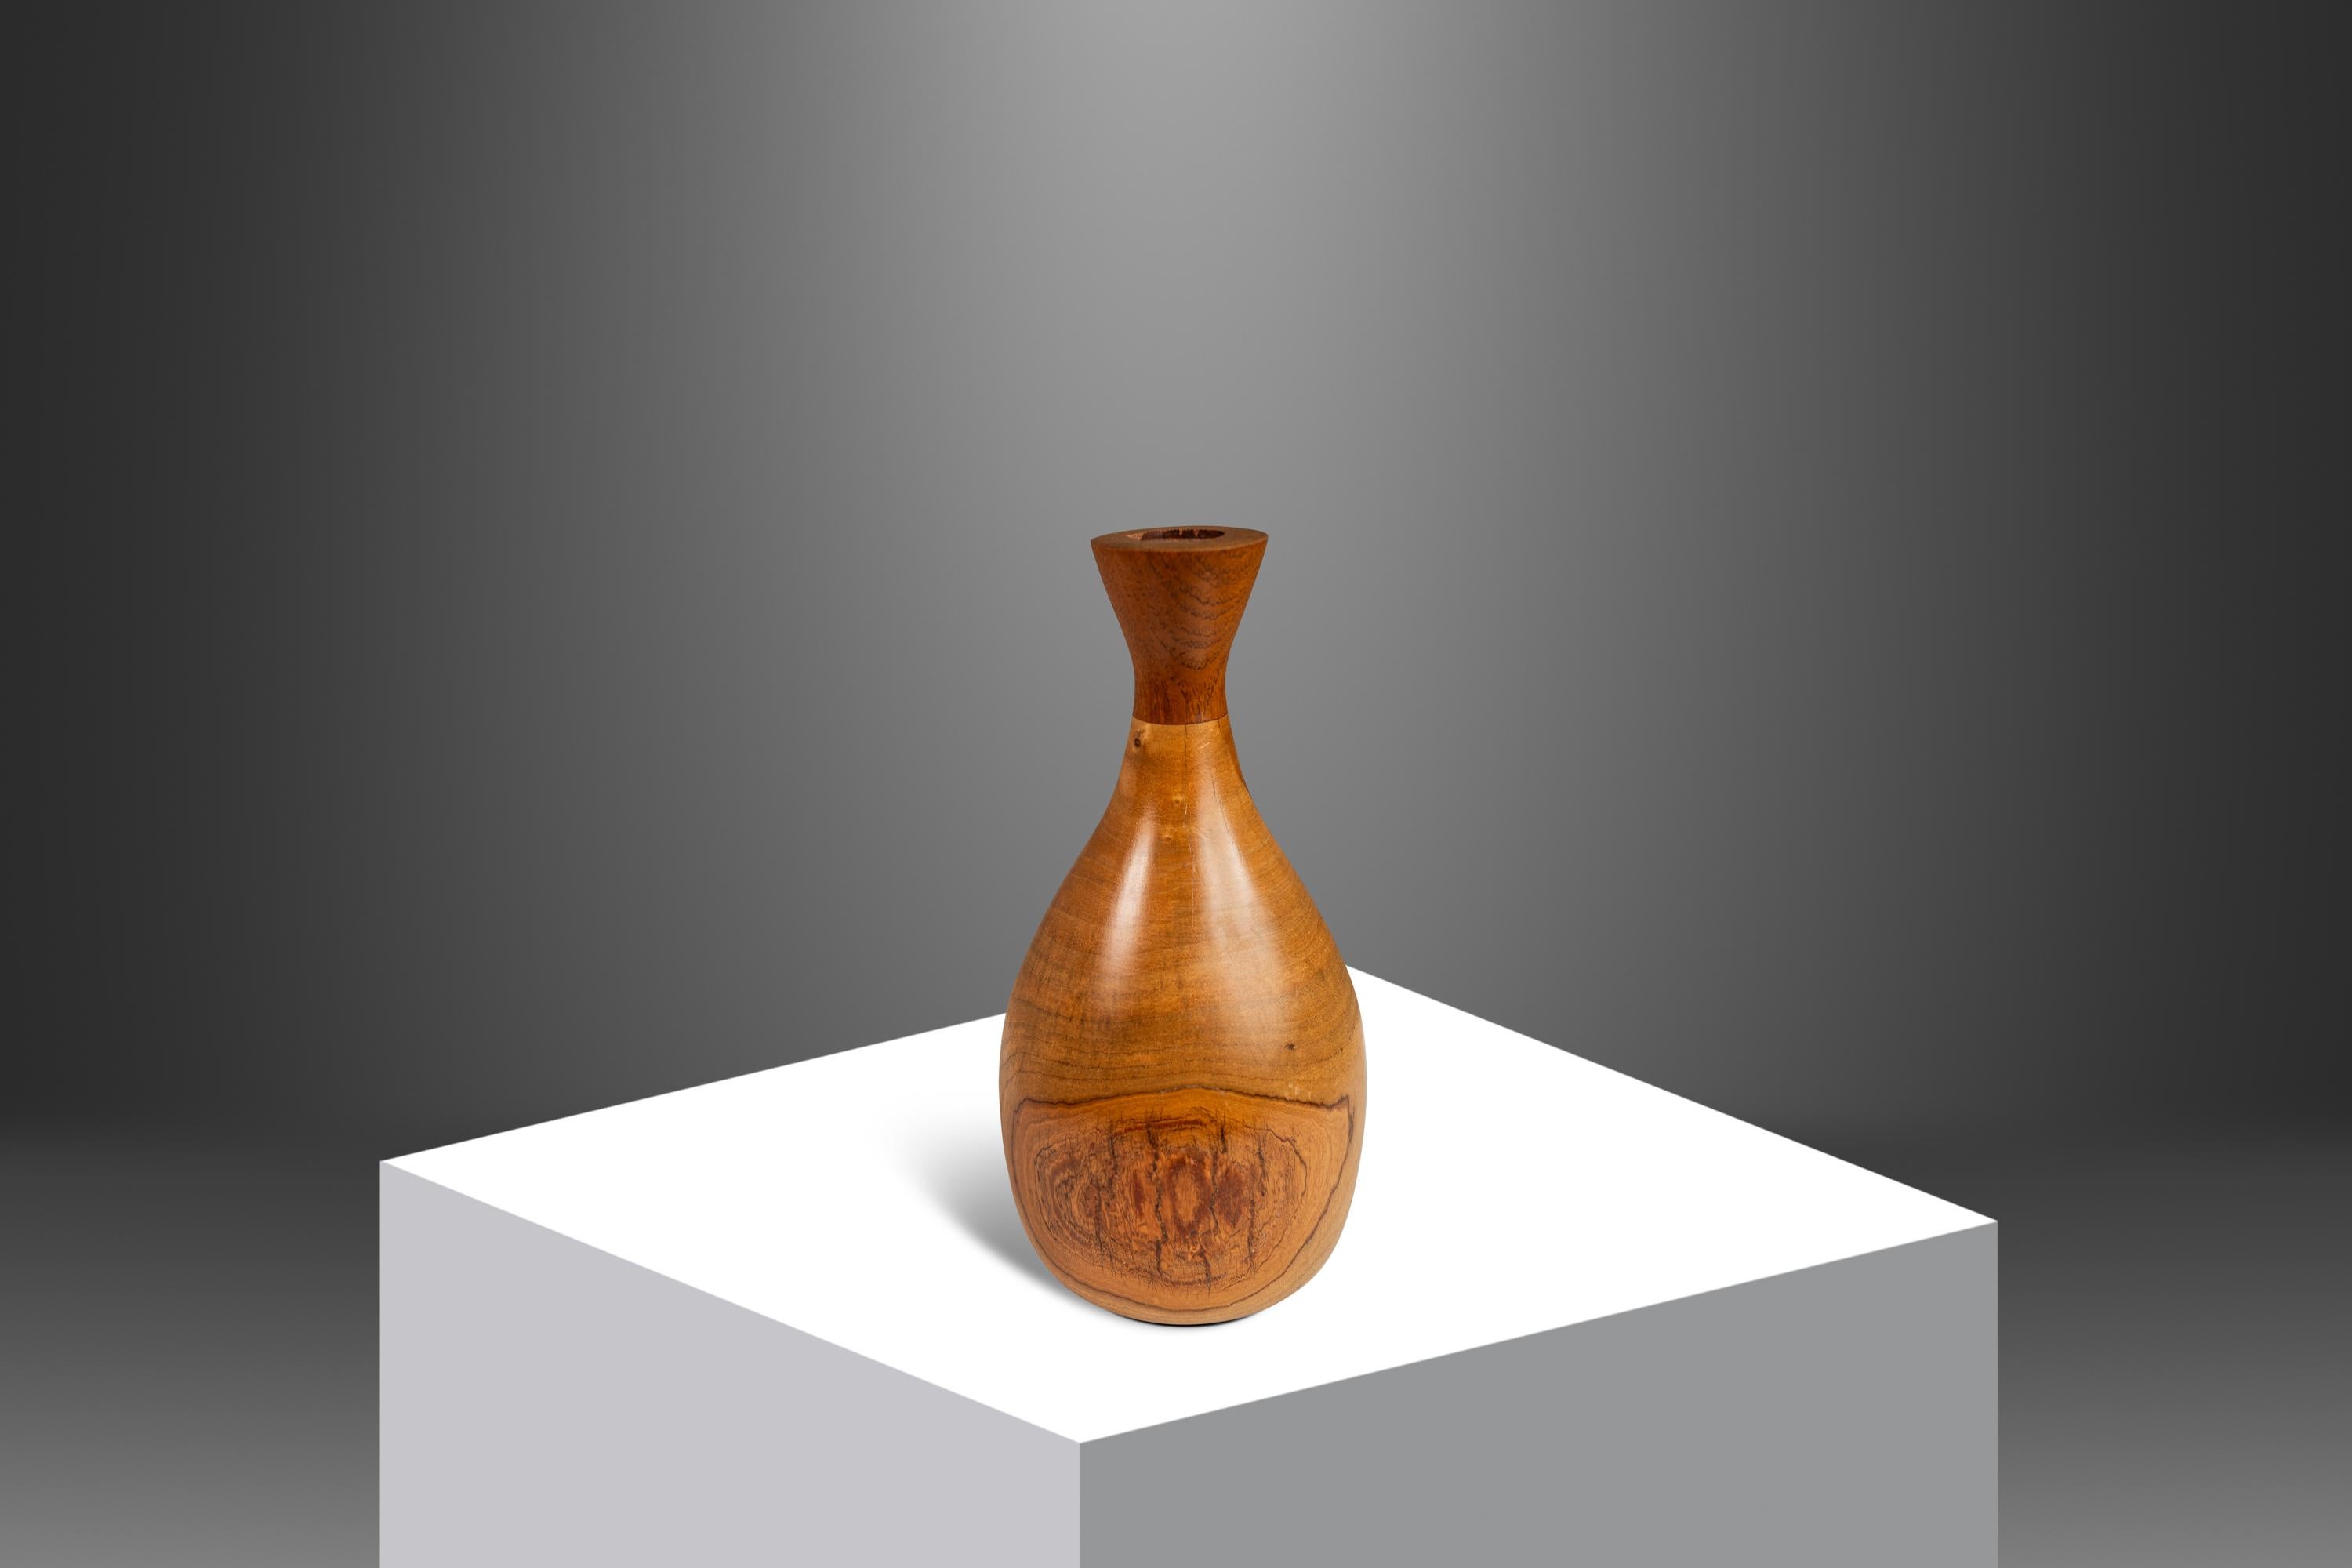 American Mid-Century Wood-Turned Hand Sculpted Vase in Solid Teak & Burlwood, USA, 1970's For Sale